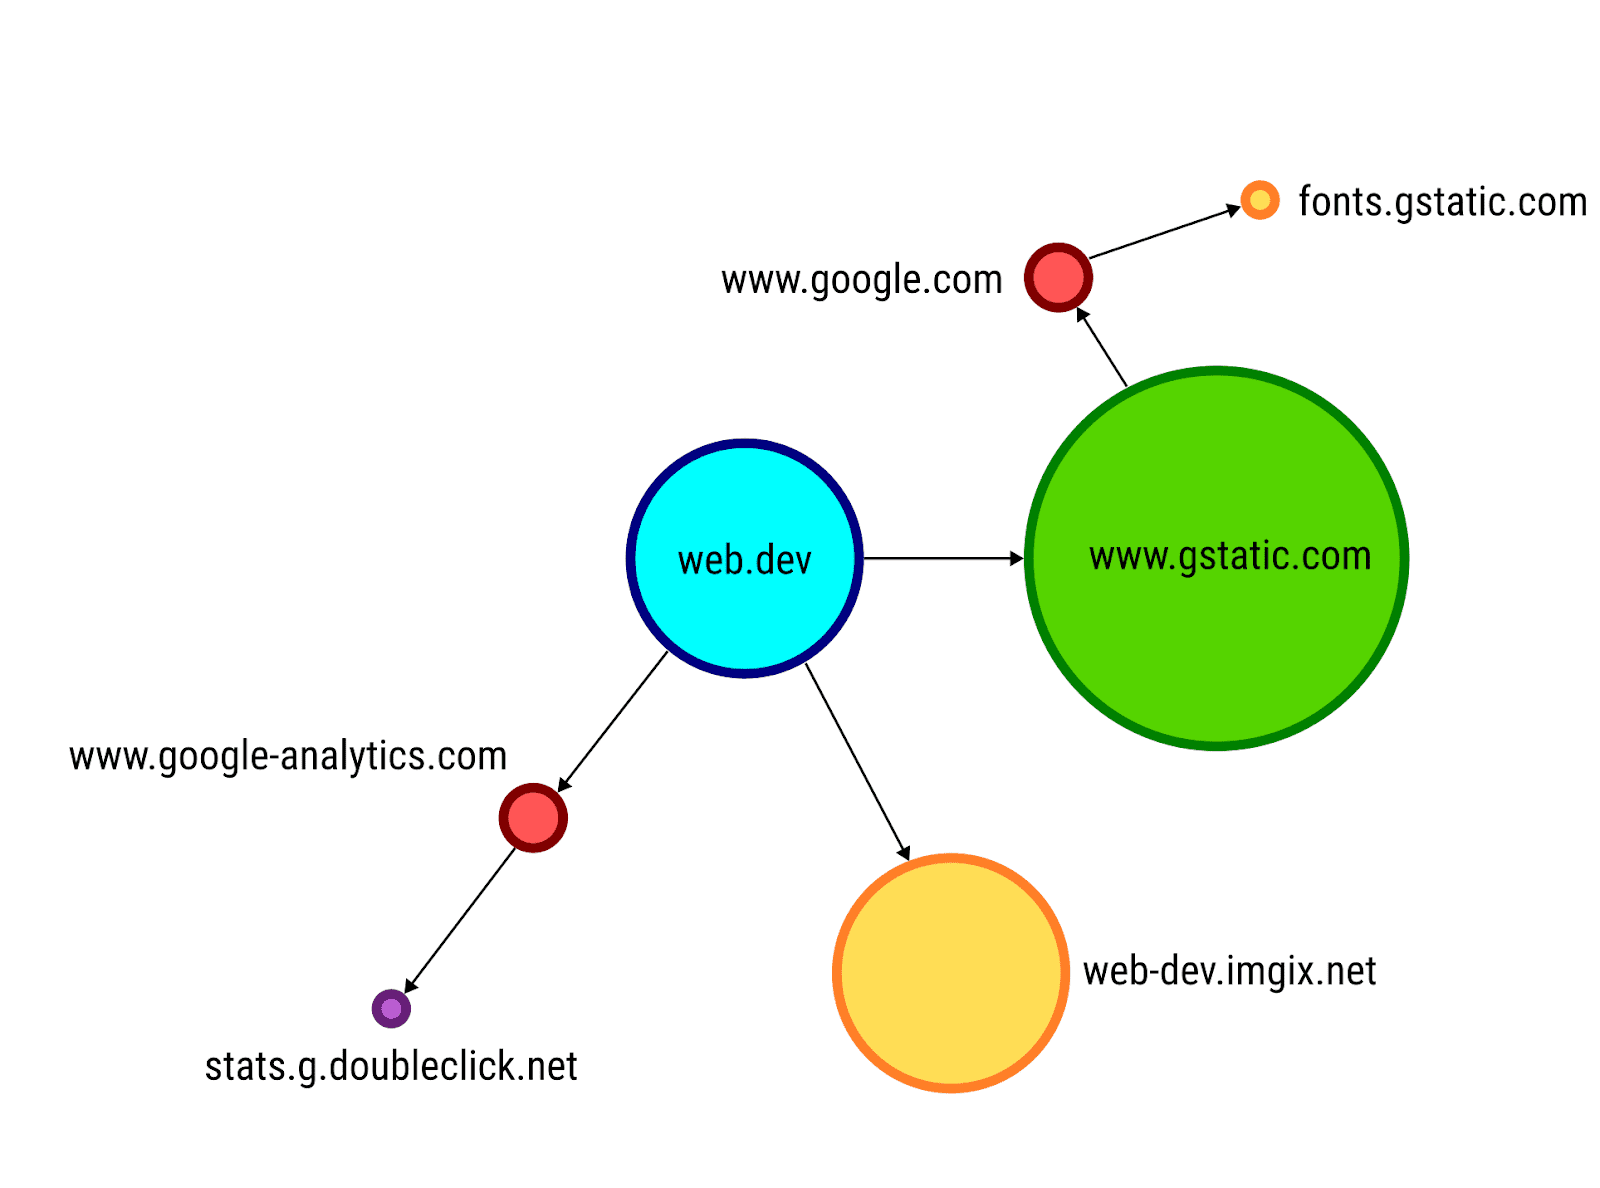 The web.dev request map.